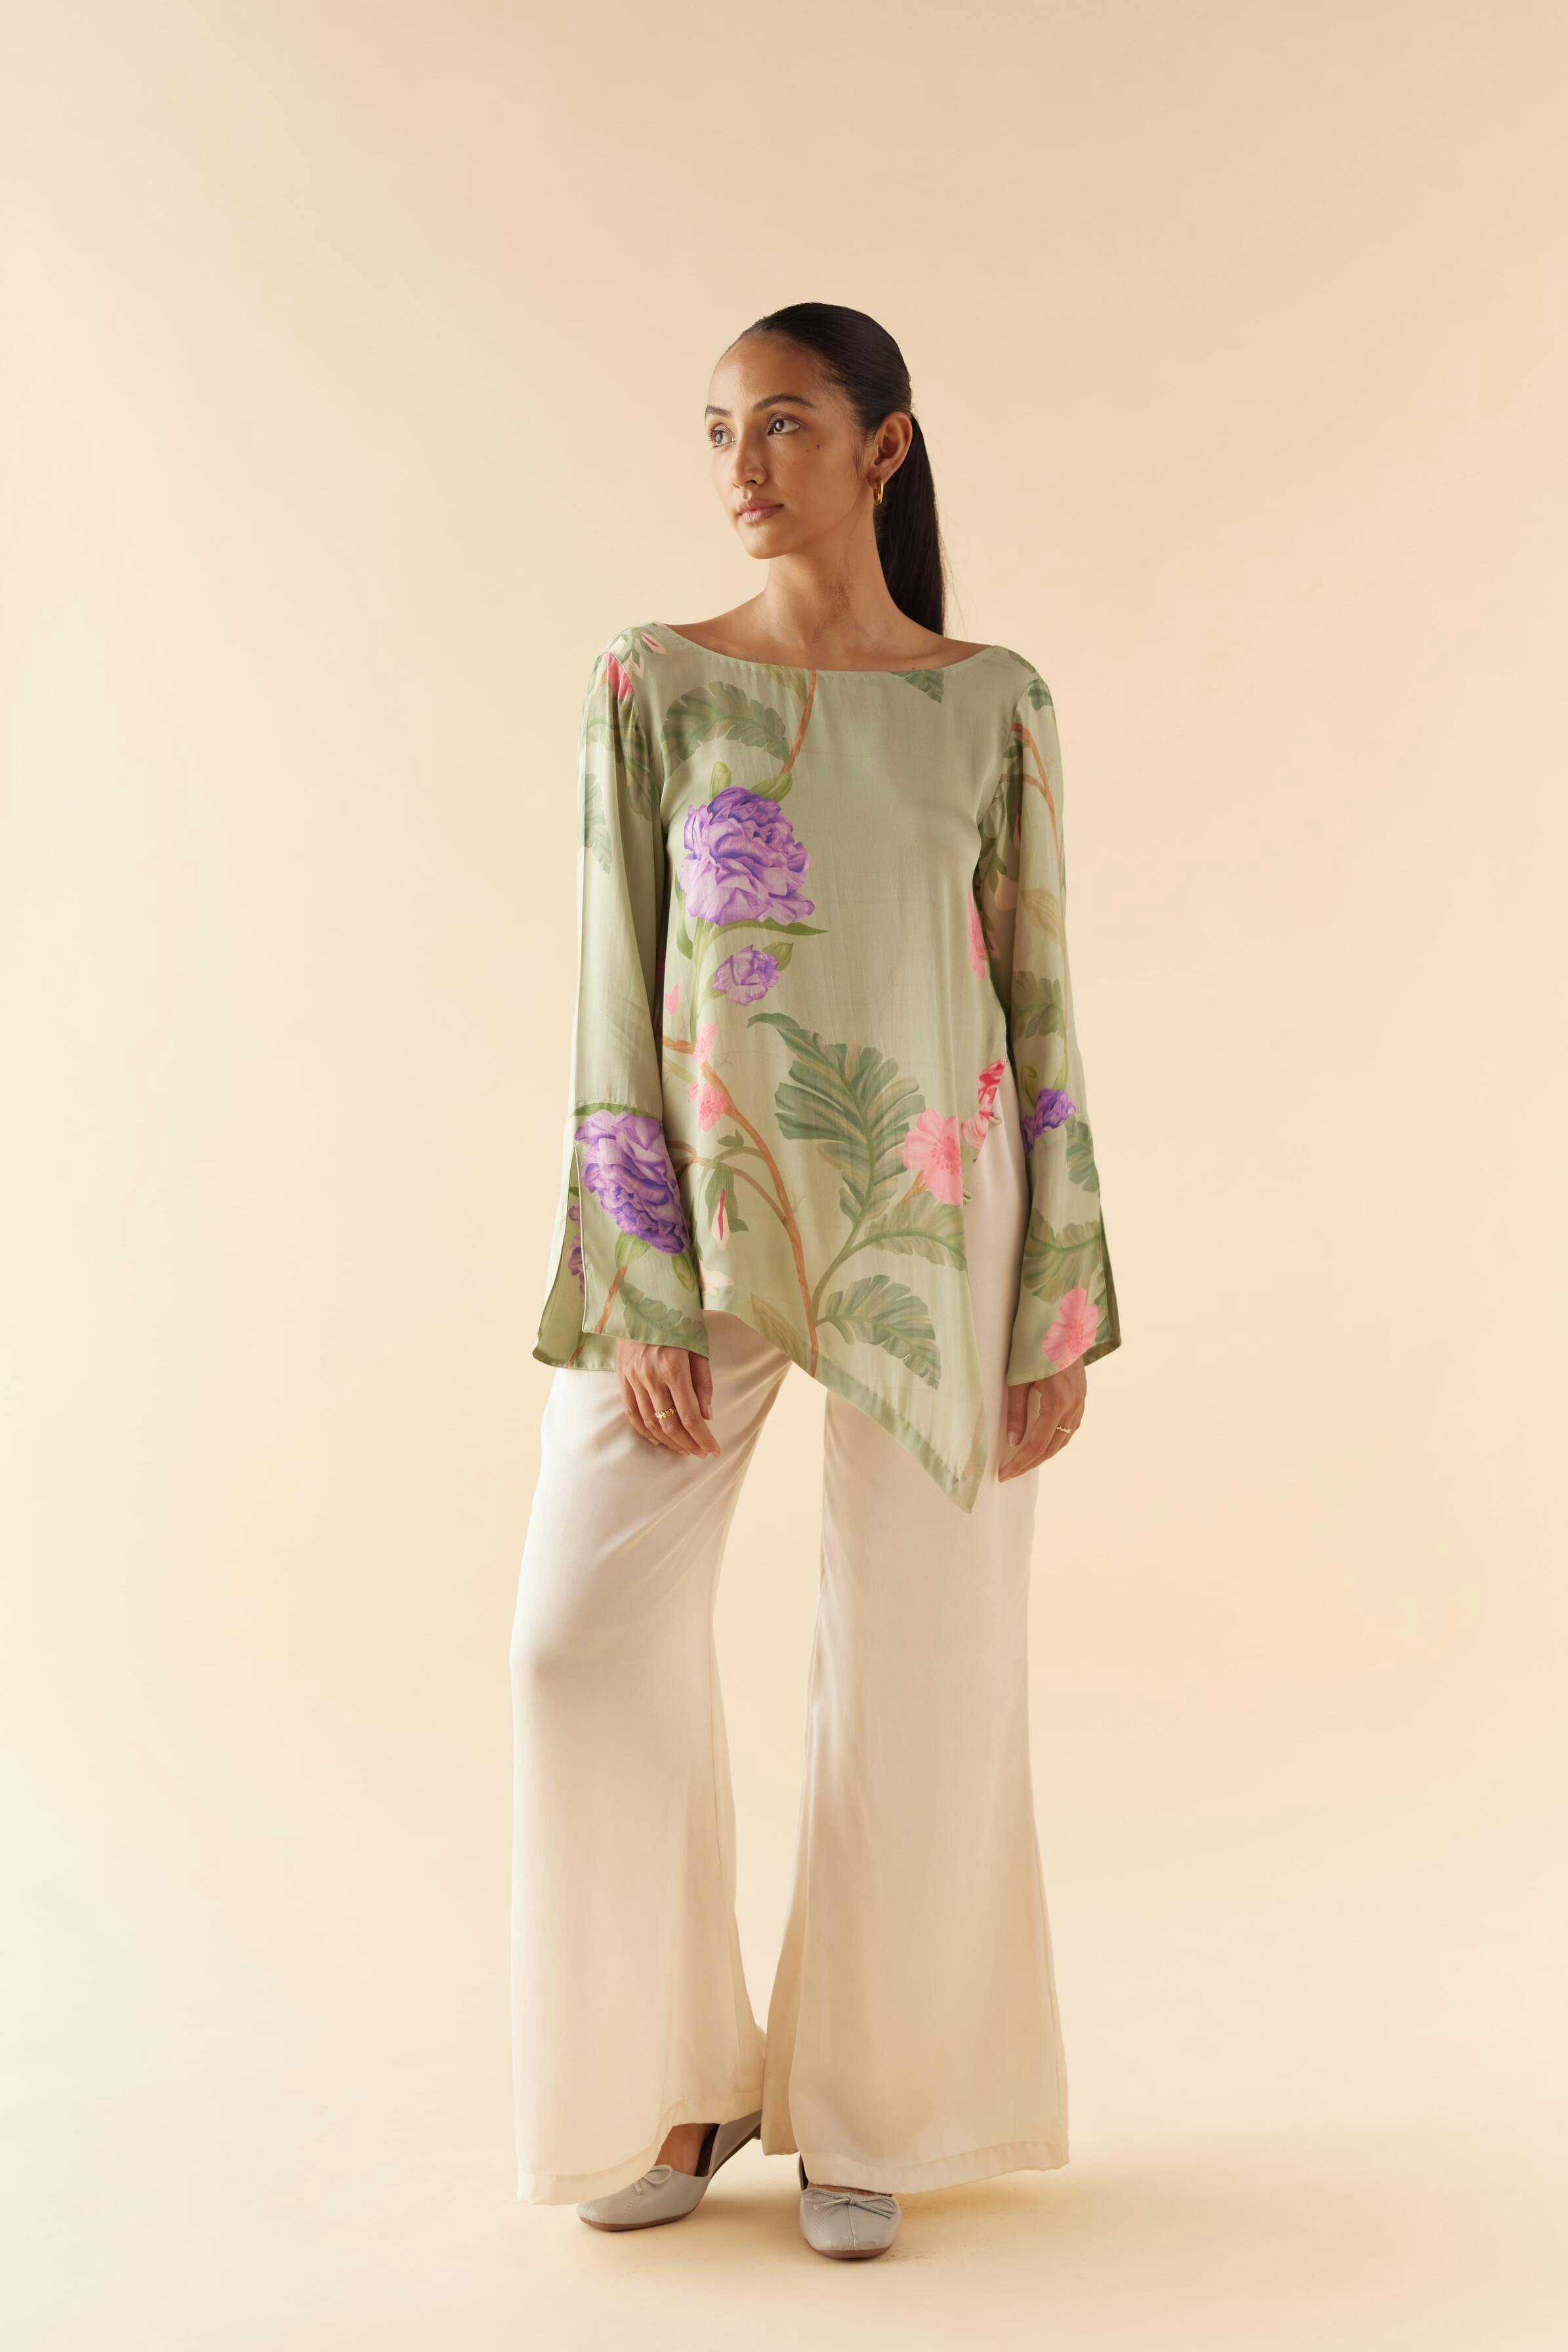 Thumbnail preview #0 for Jade Floral Dream Asymmetrical Lounge Top